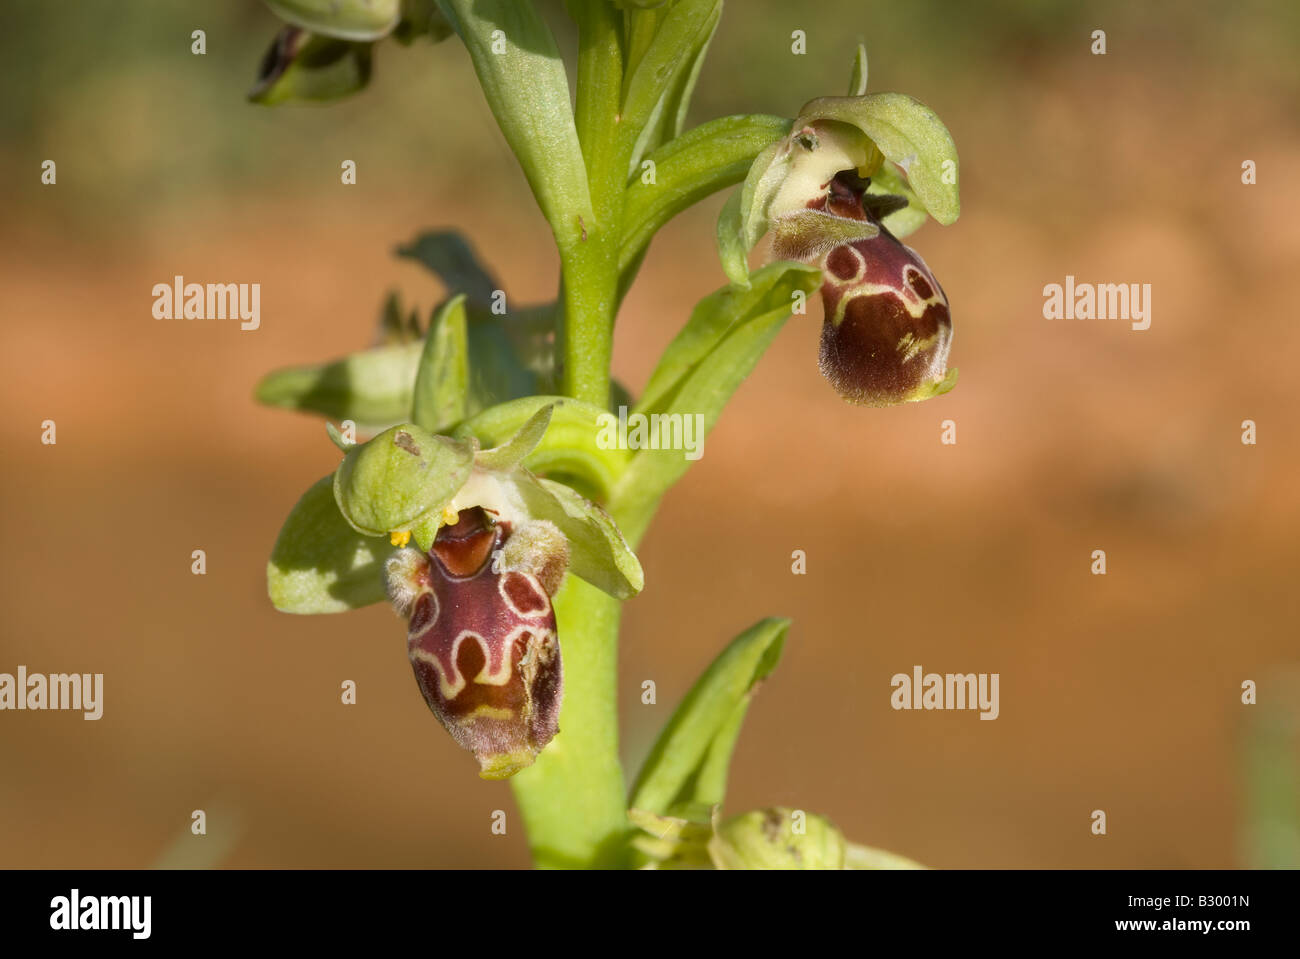 Bee Orchid flowers wild guide book europe greece Stock Photo